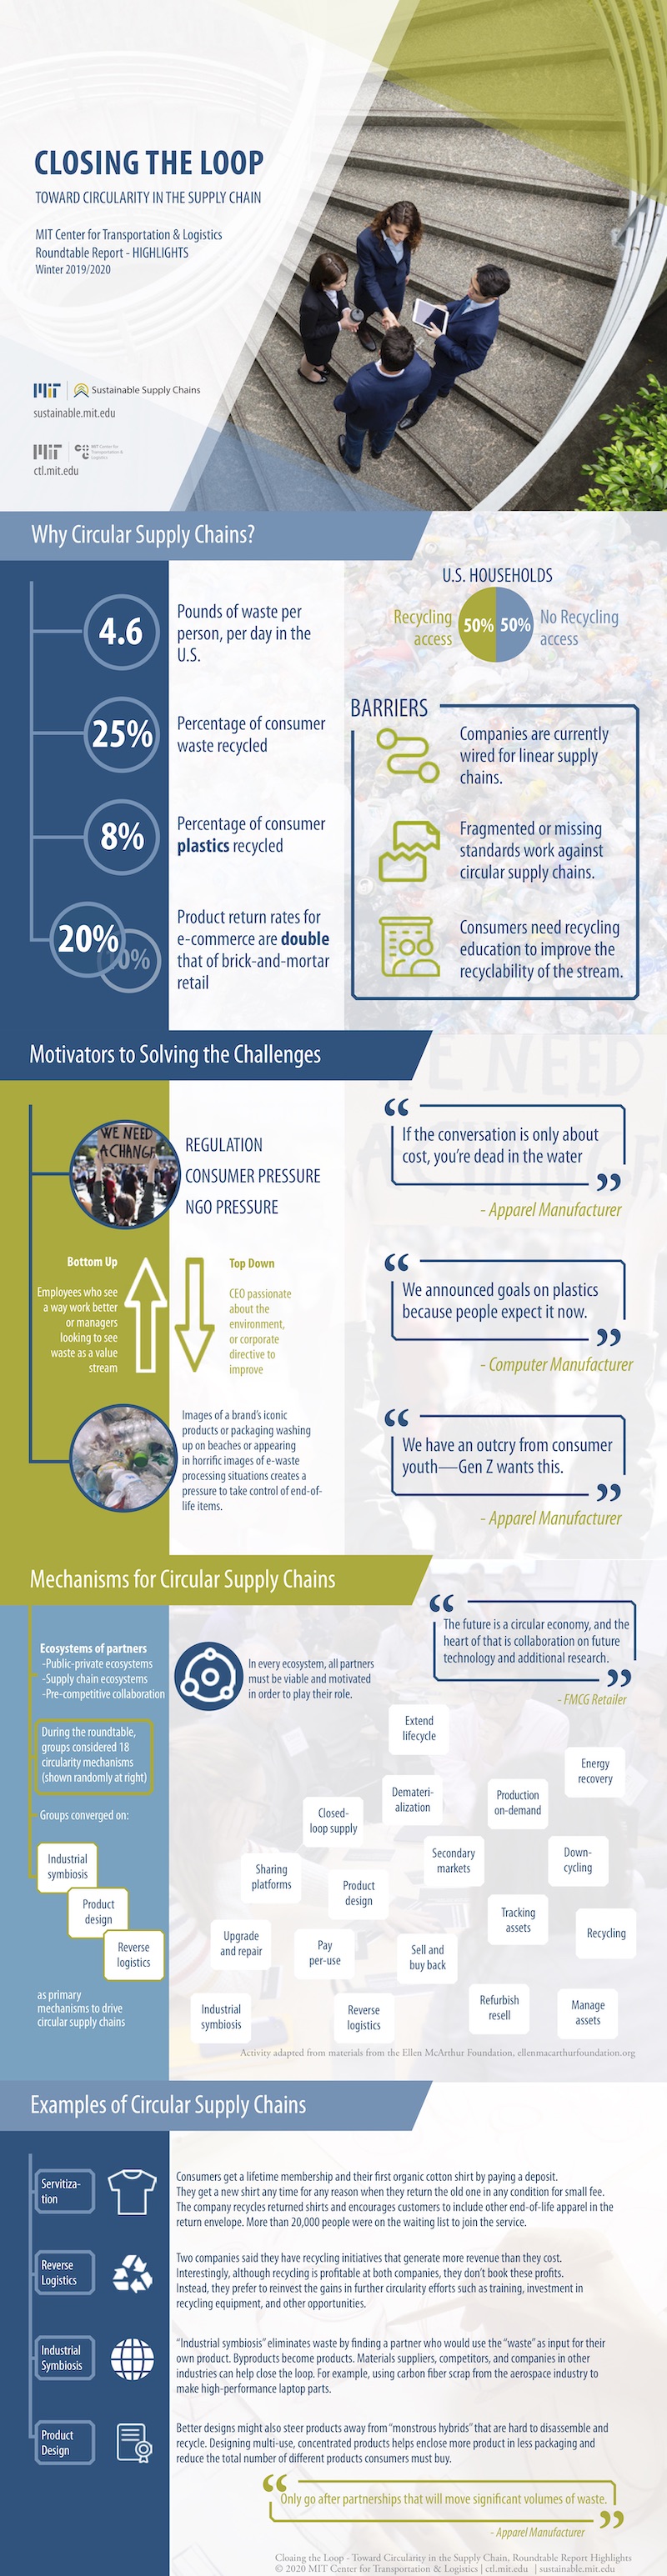 Circular Supply Chain roundtable infographic MIT CTL